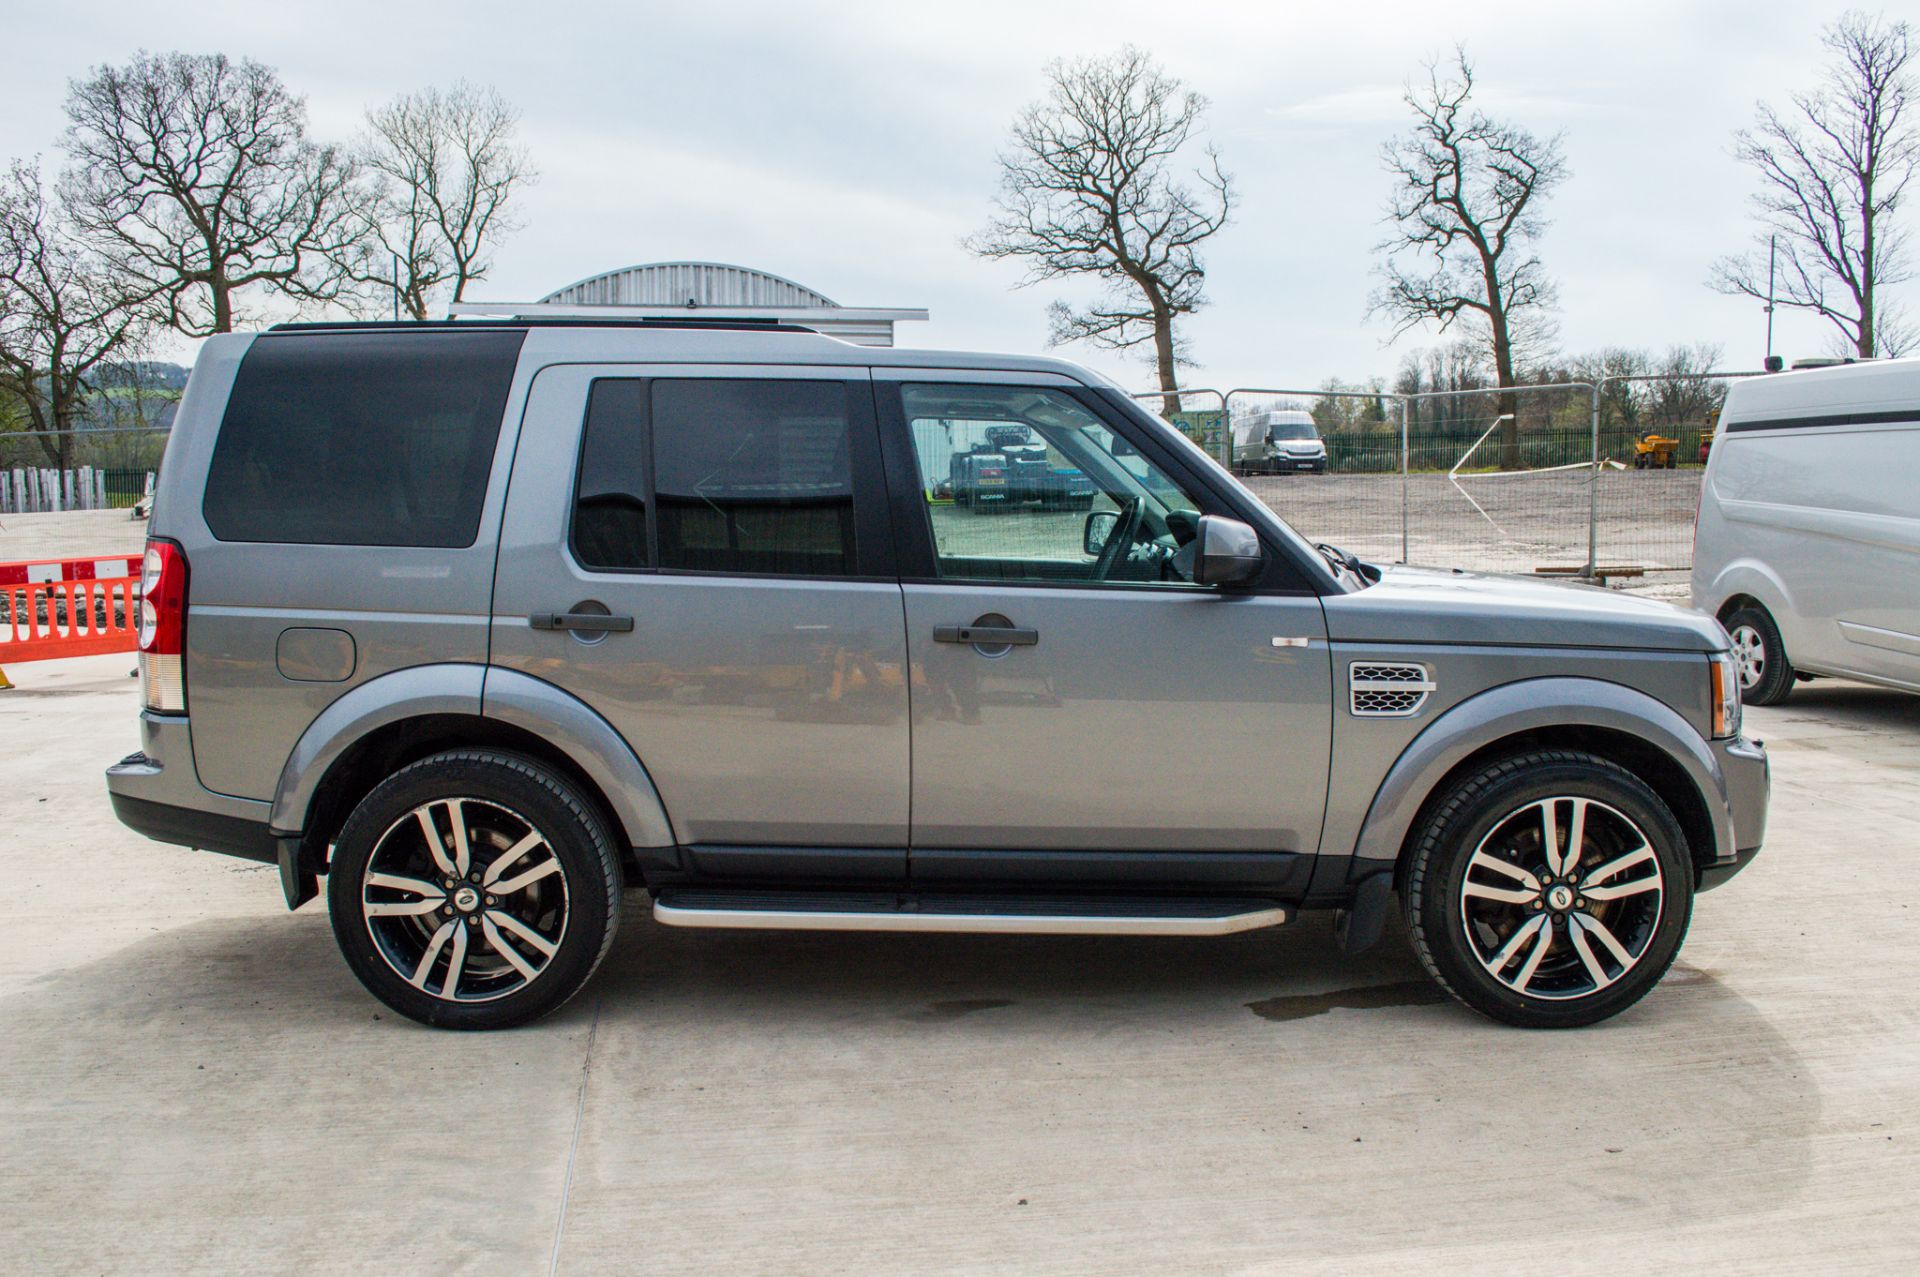 Land Rover Discovery 4 HSE SDV6 3.0 diesel automatic estate car - Image 8 of 32